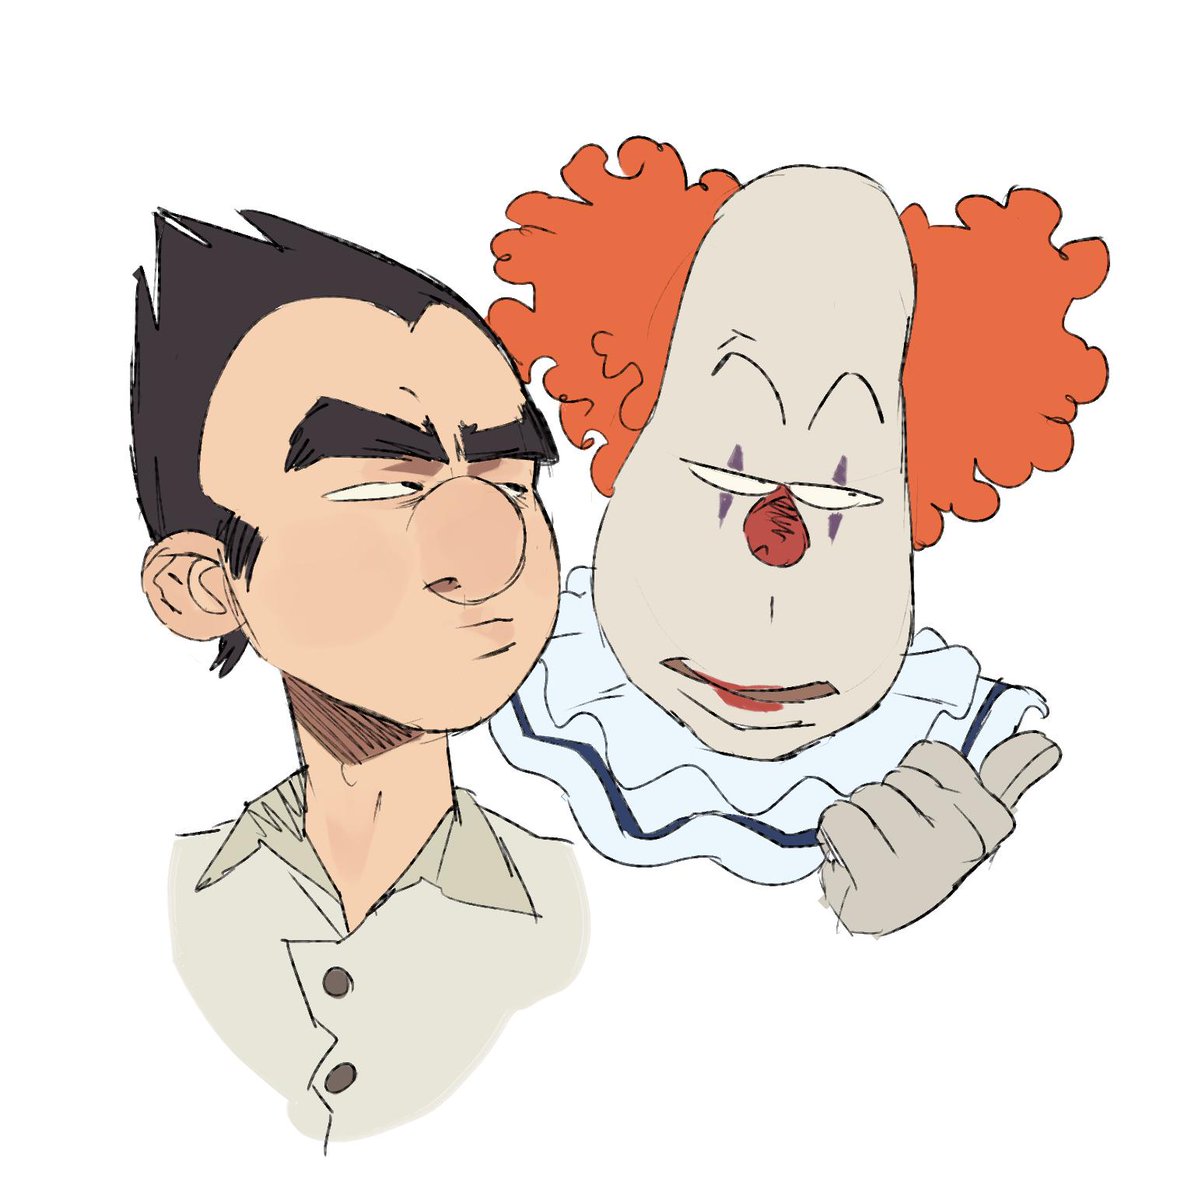 my old dnd characters, joelshoe and pennywise 